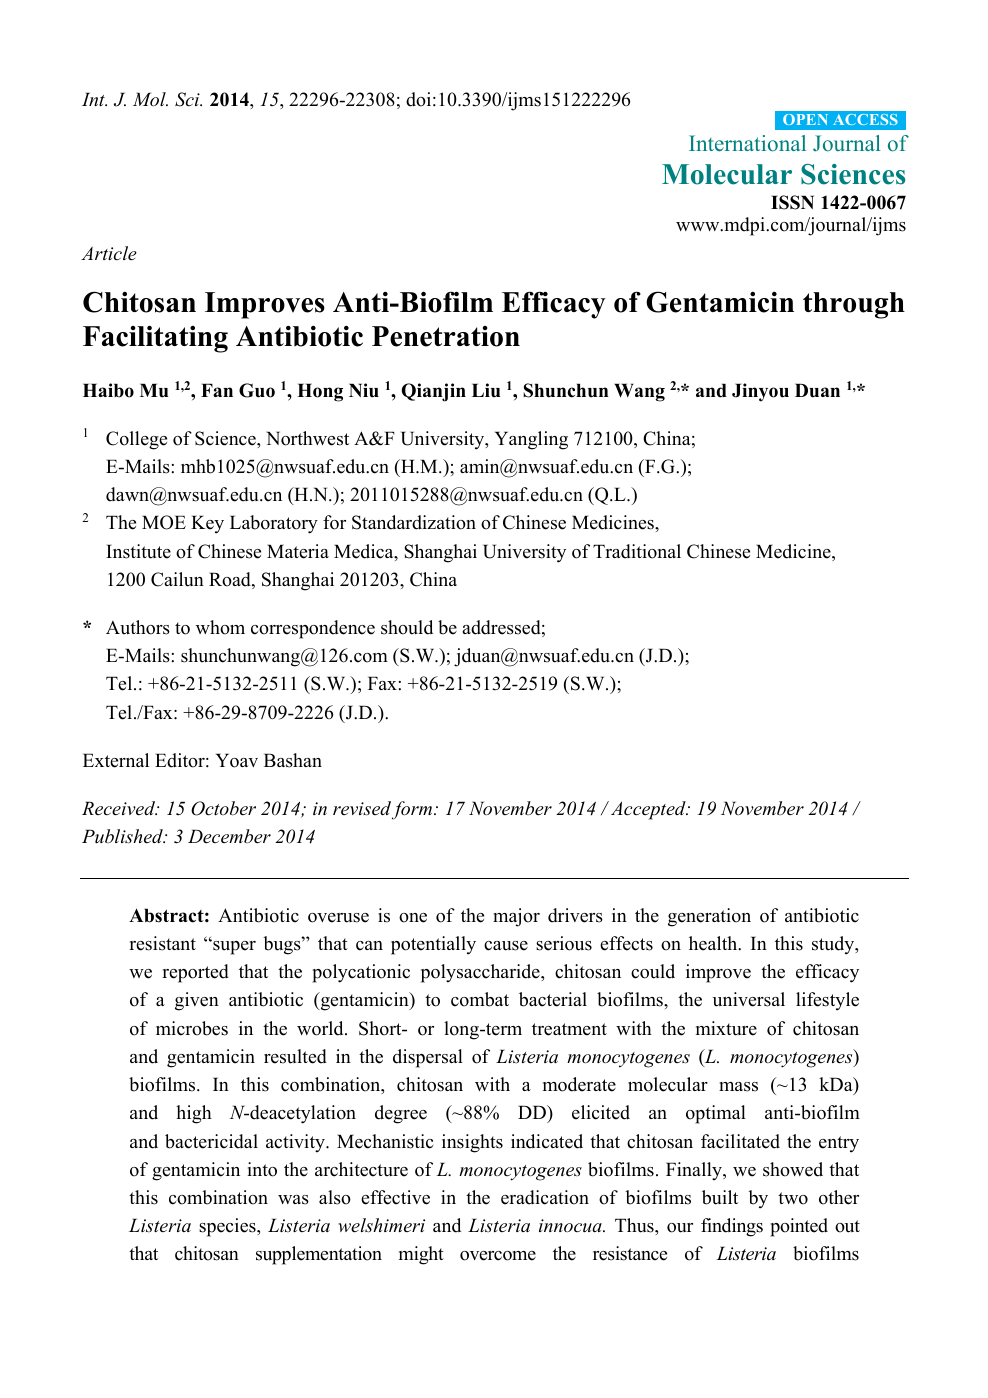 Chitosan Improves Anti Biofilm Efficacy Of Gentamicin Through Facilitating Antibiotic Penetration Topic Of Research Paper In Biological Sciences Download Scholarly Article Pdf And Read For Free On Cyberleninka Open Science Hub